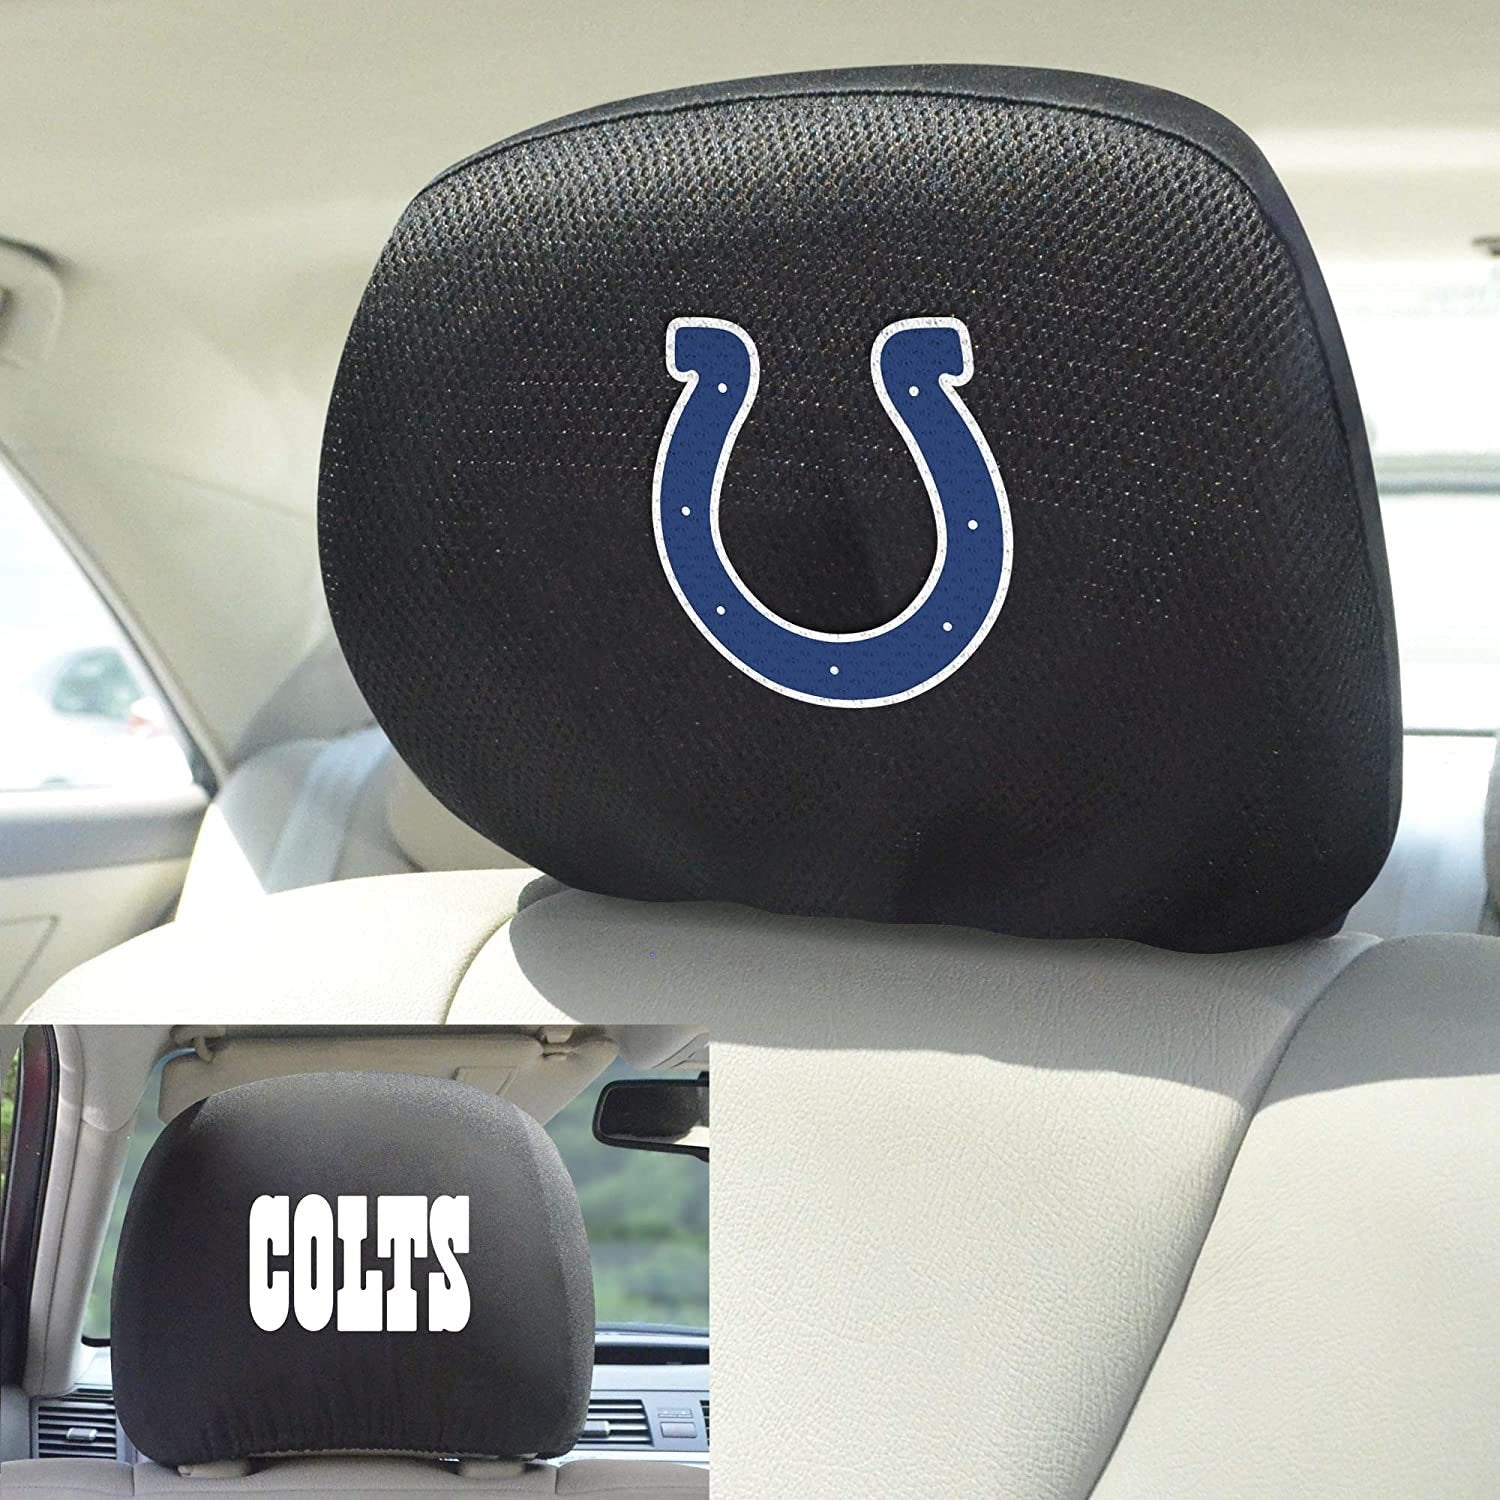 Indianapolis Colts Pair of Premium Auto Head Rest Covers, Embroidered, Black Elastic, 14x10 Inch